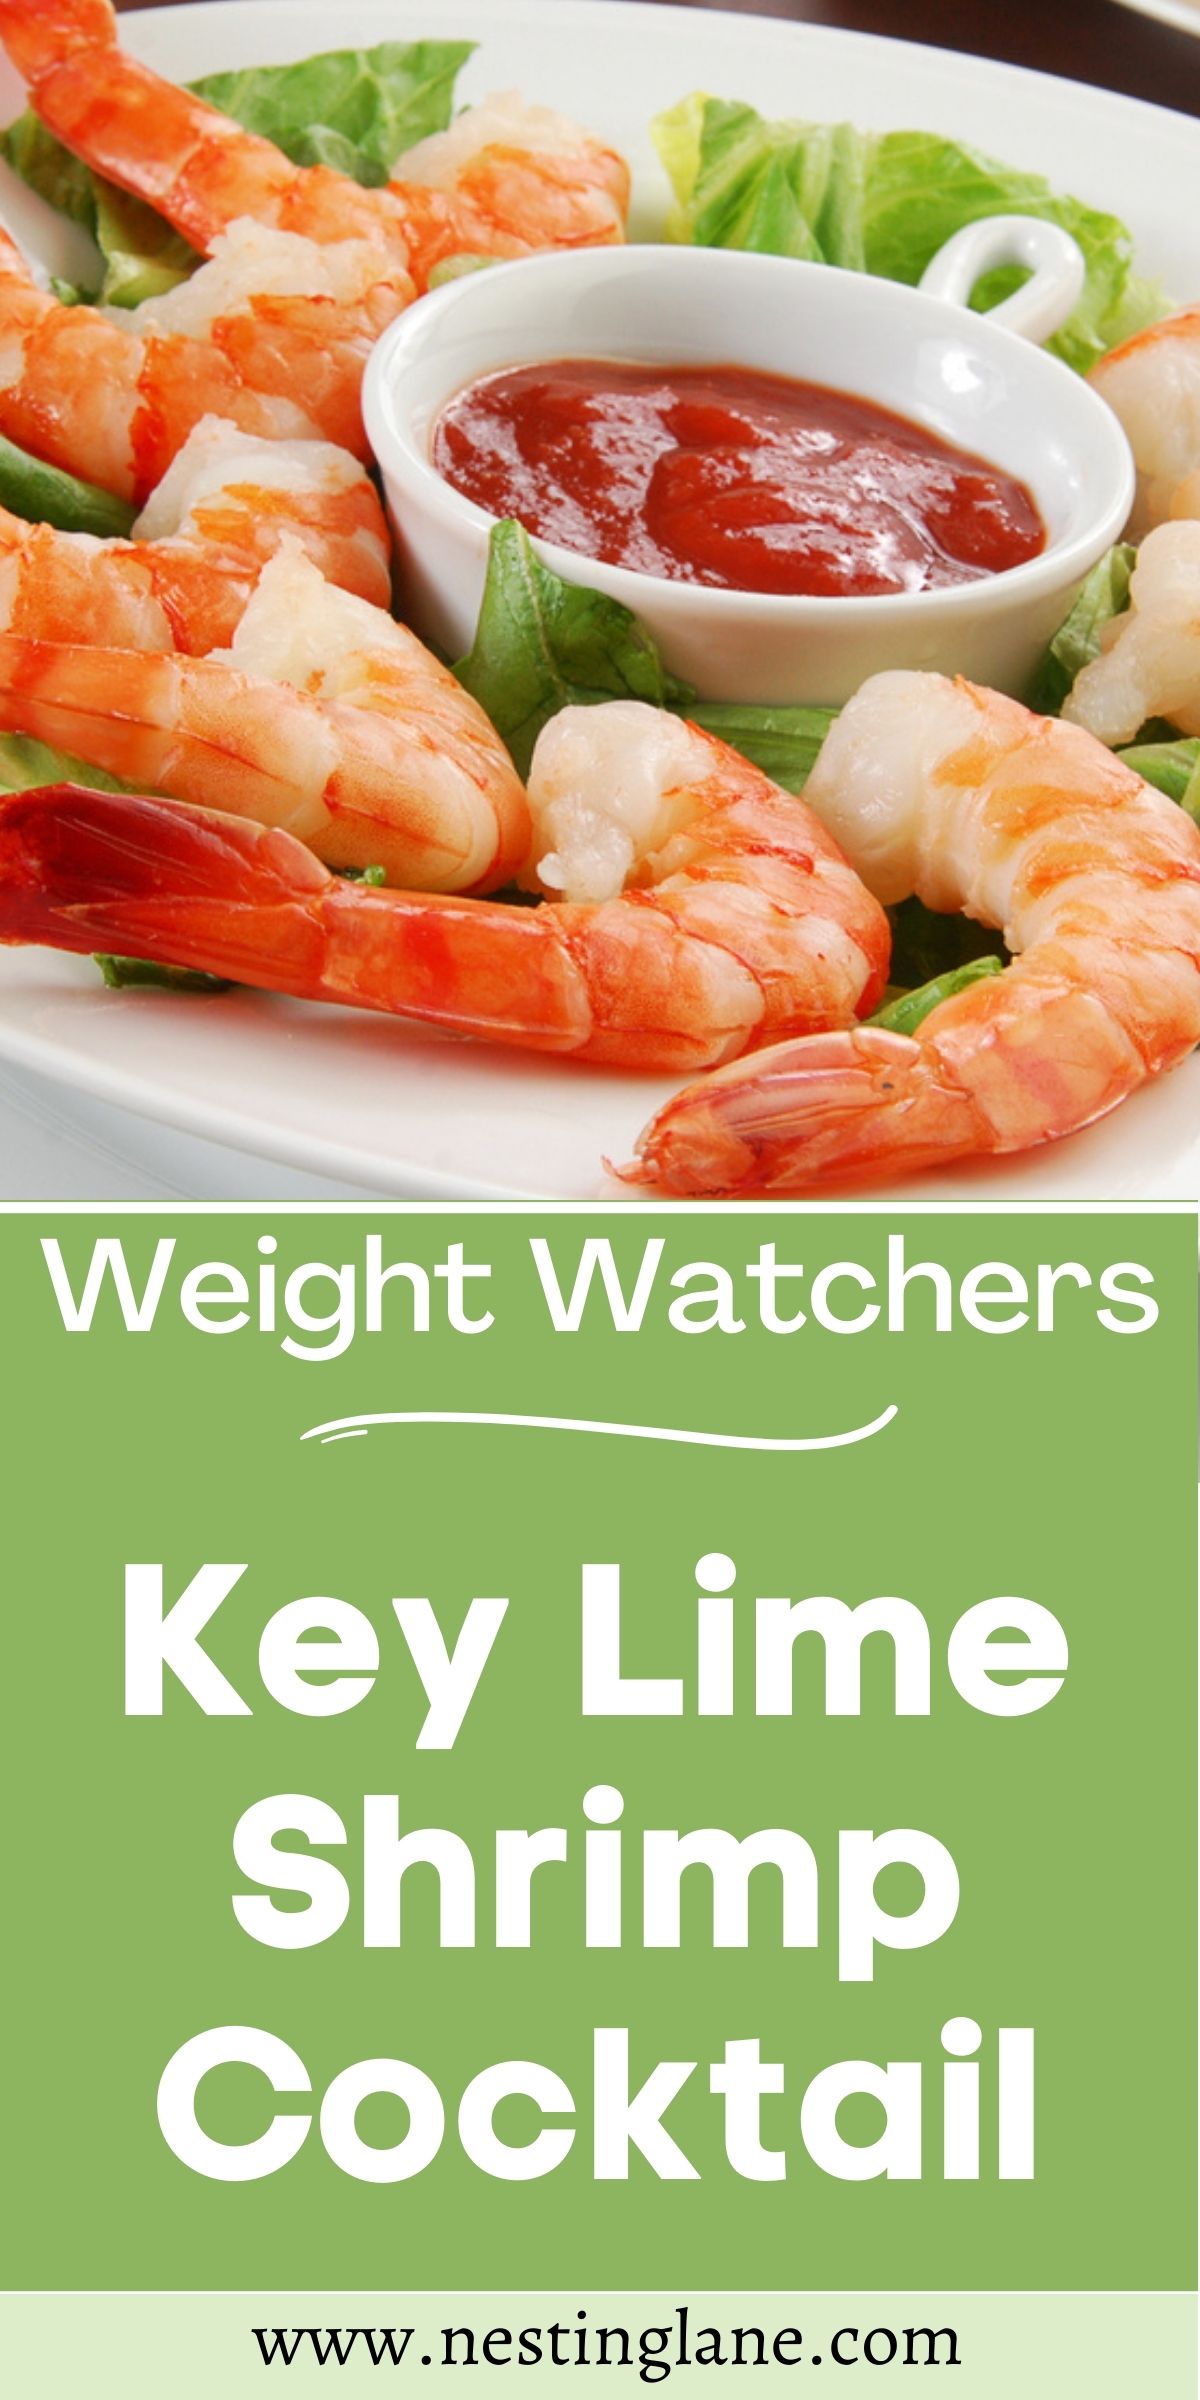 Graphic for Pinterest of Sweet and Tangy Key Lime Shrimp Cocktail (Weight Watchers) Recipe.